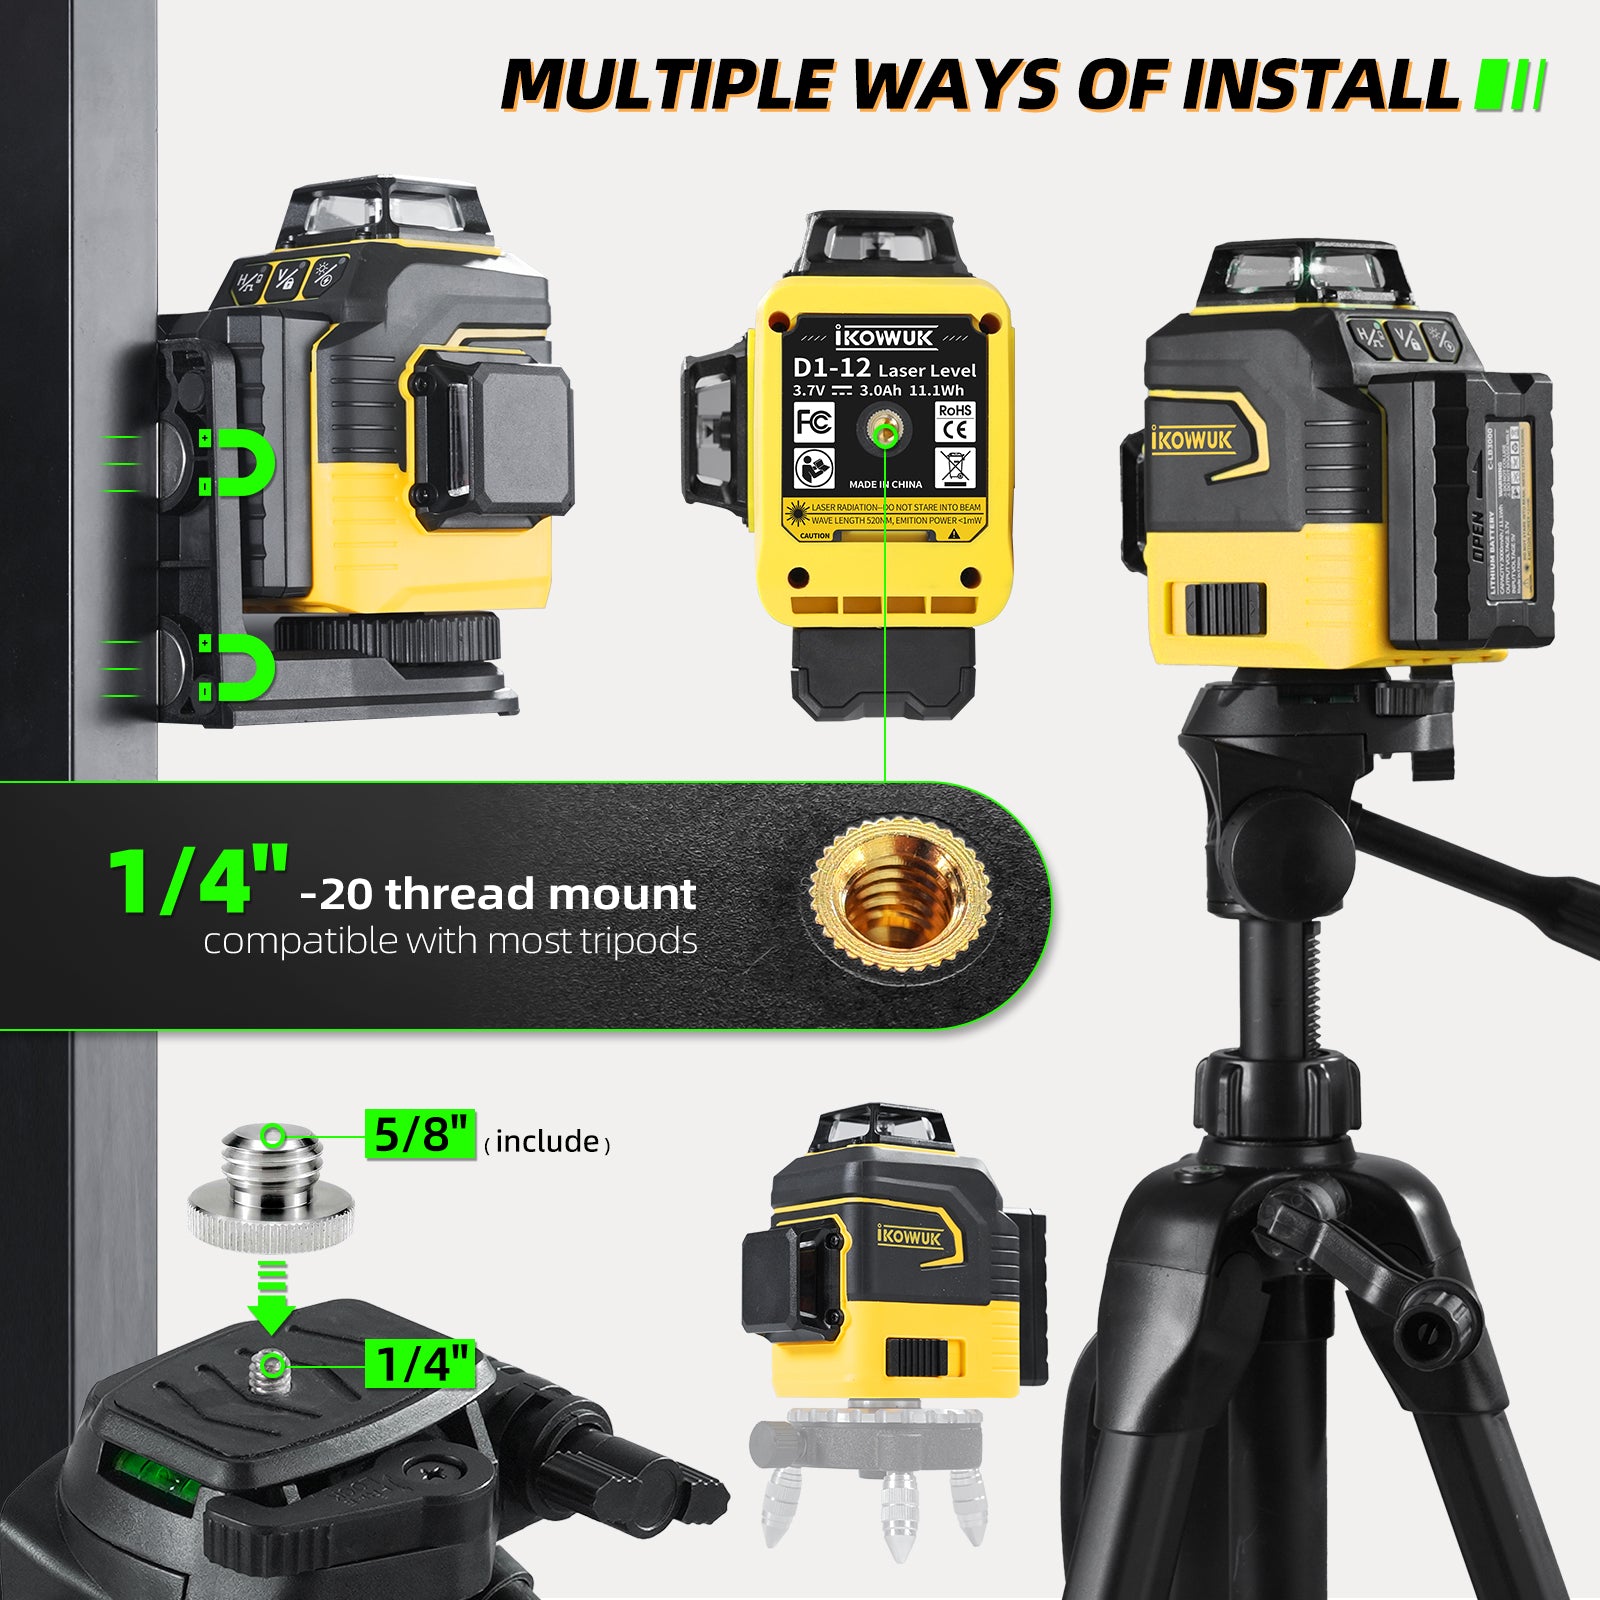 IKOVWUK Laser Level with Tripod, Laser Level 3x360° Self Leveling 12 Green Line, Rechargeable Battery 2 x 3000 mAh & Type-C Charging Port, Compact Adjustable 1.6M Tripod & Carry Pouch Included